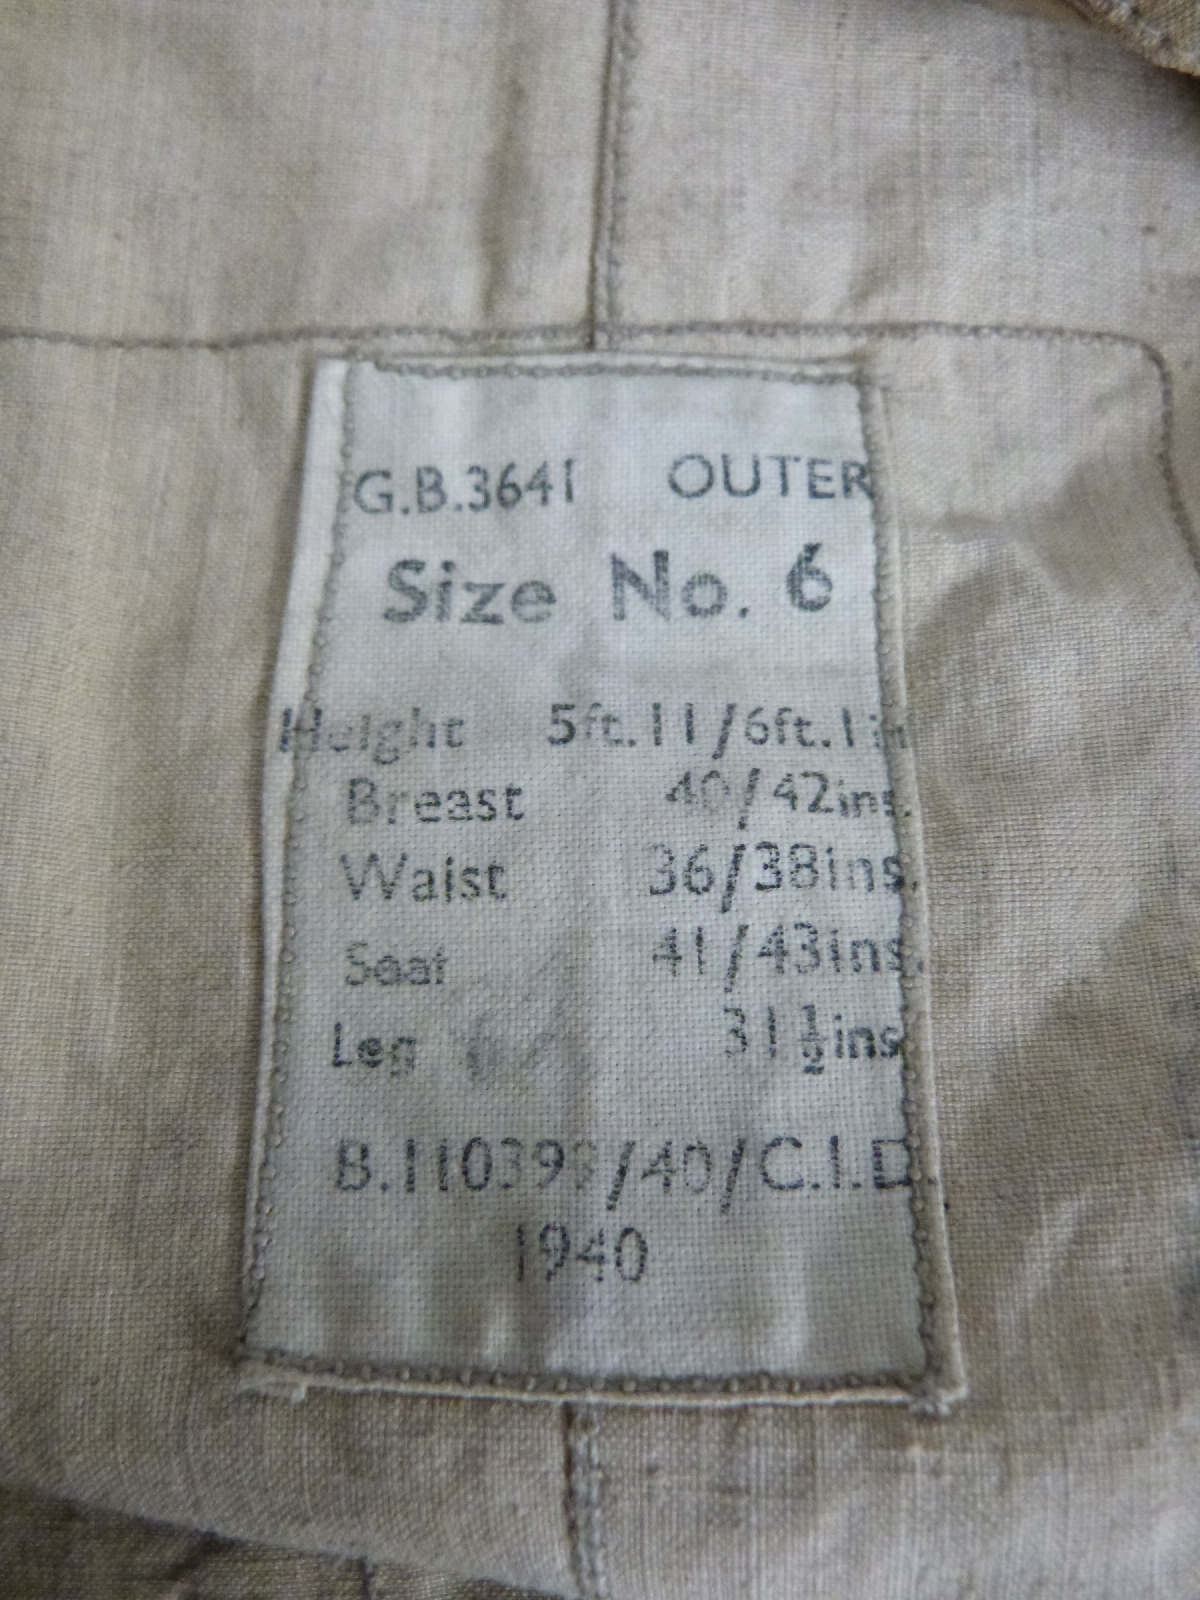 WWII Sidcot flying suit marked 'GB 3641 outer', dated 1940, size No 6, - Image 2 of 3